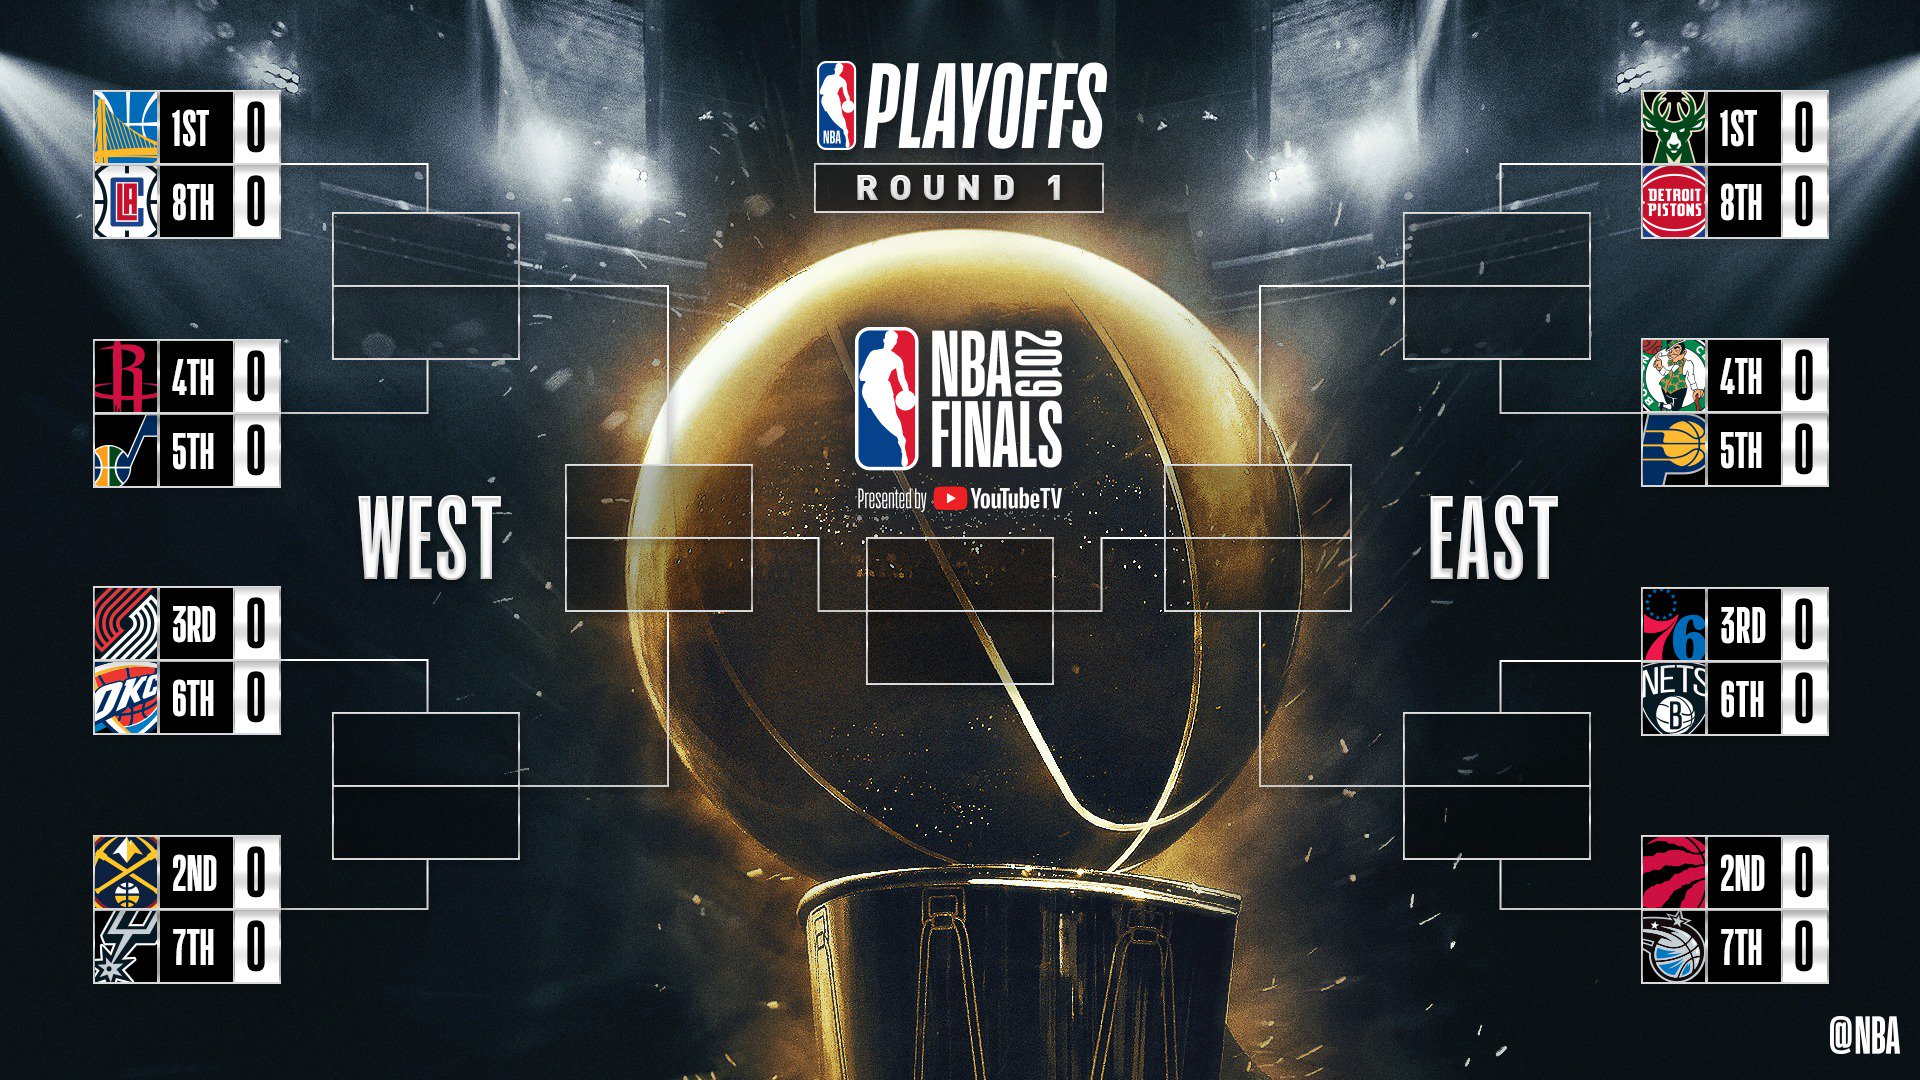 NBA on Twitter: "The 2019 #NBAPlayoffs are set! Games ...